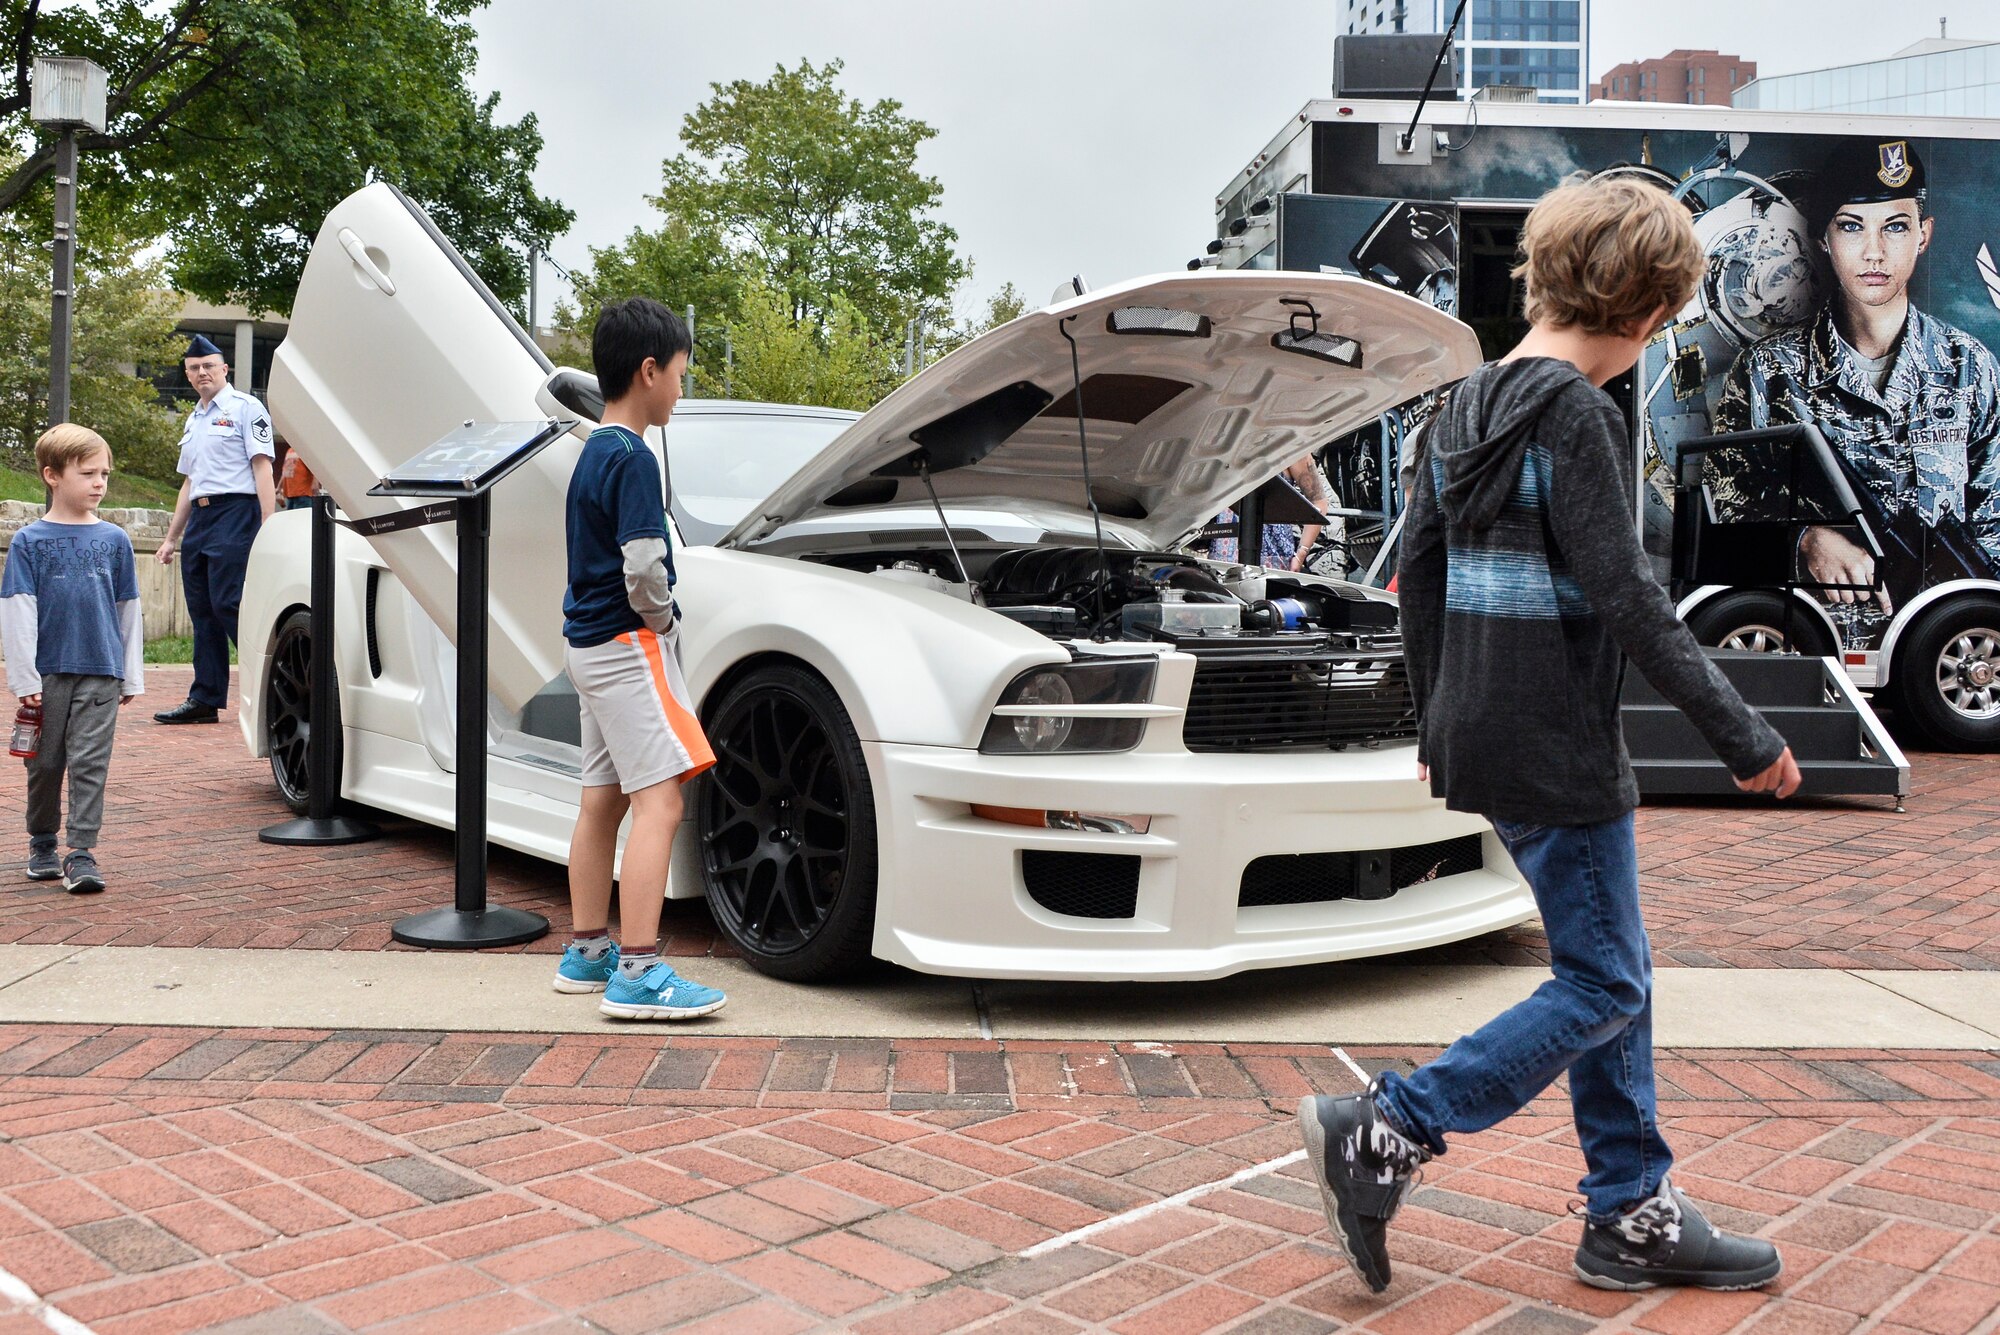 Local Maryland children inspect the Ford Mustang (X-1) during Fleet Week October 6, 2018 in Baltimore, Maryland. The X-1 is part of an Air Force Recruiting Service 2009 Super Car Tour recruiting initiative that kicked off in May of 2009. (U.S. Air Force photo by Staff Sgt. Alexandre Montes)